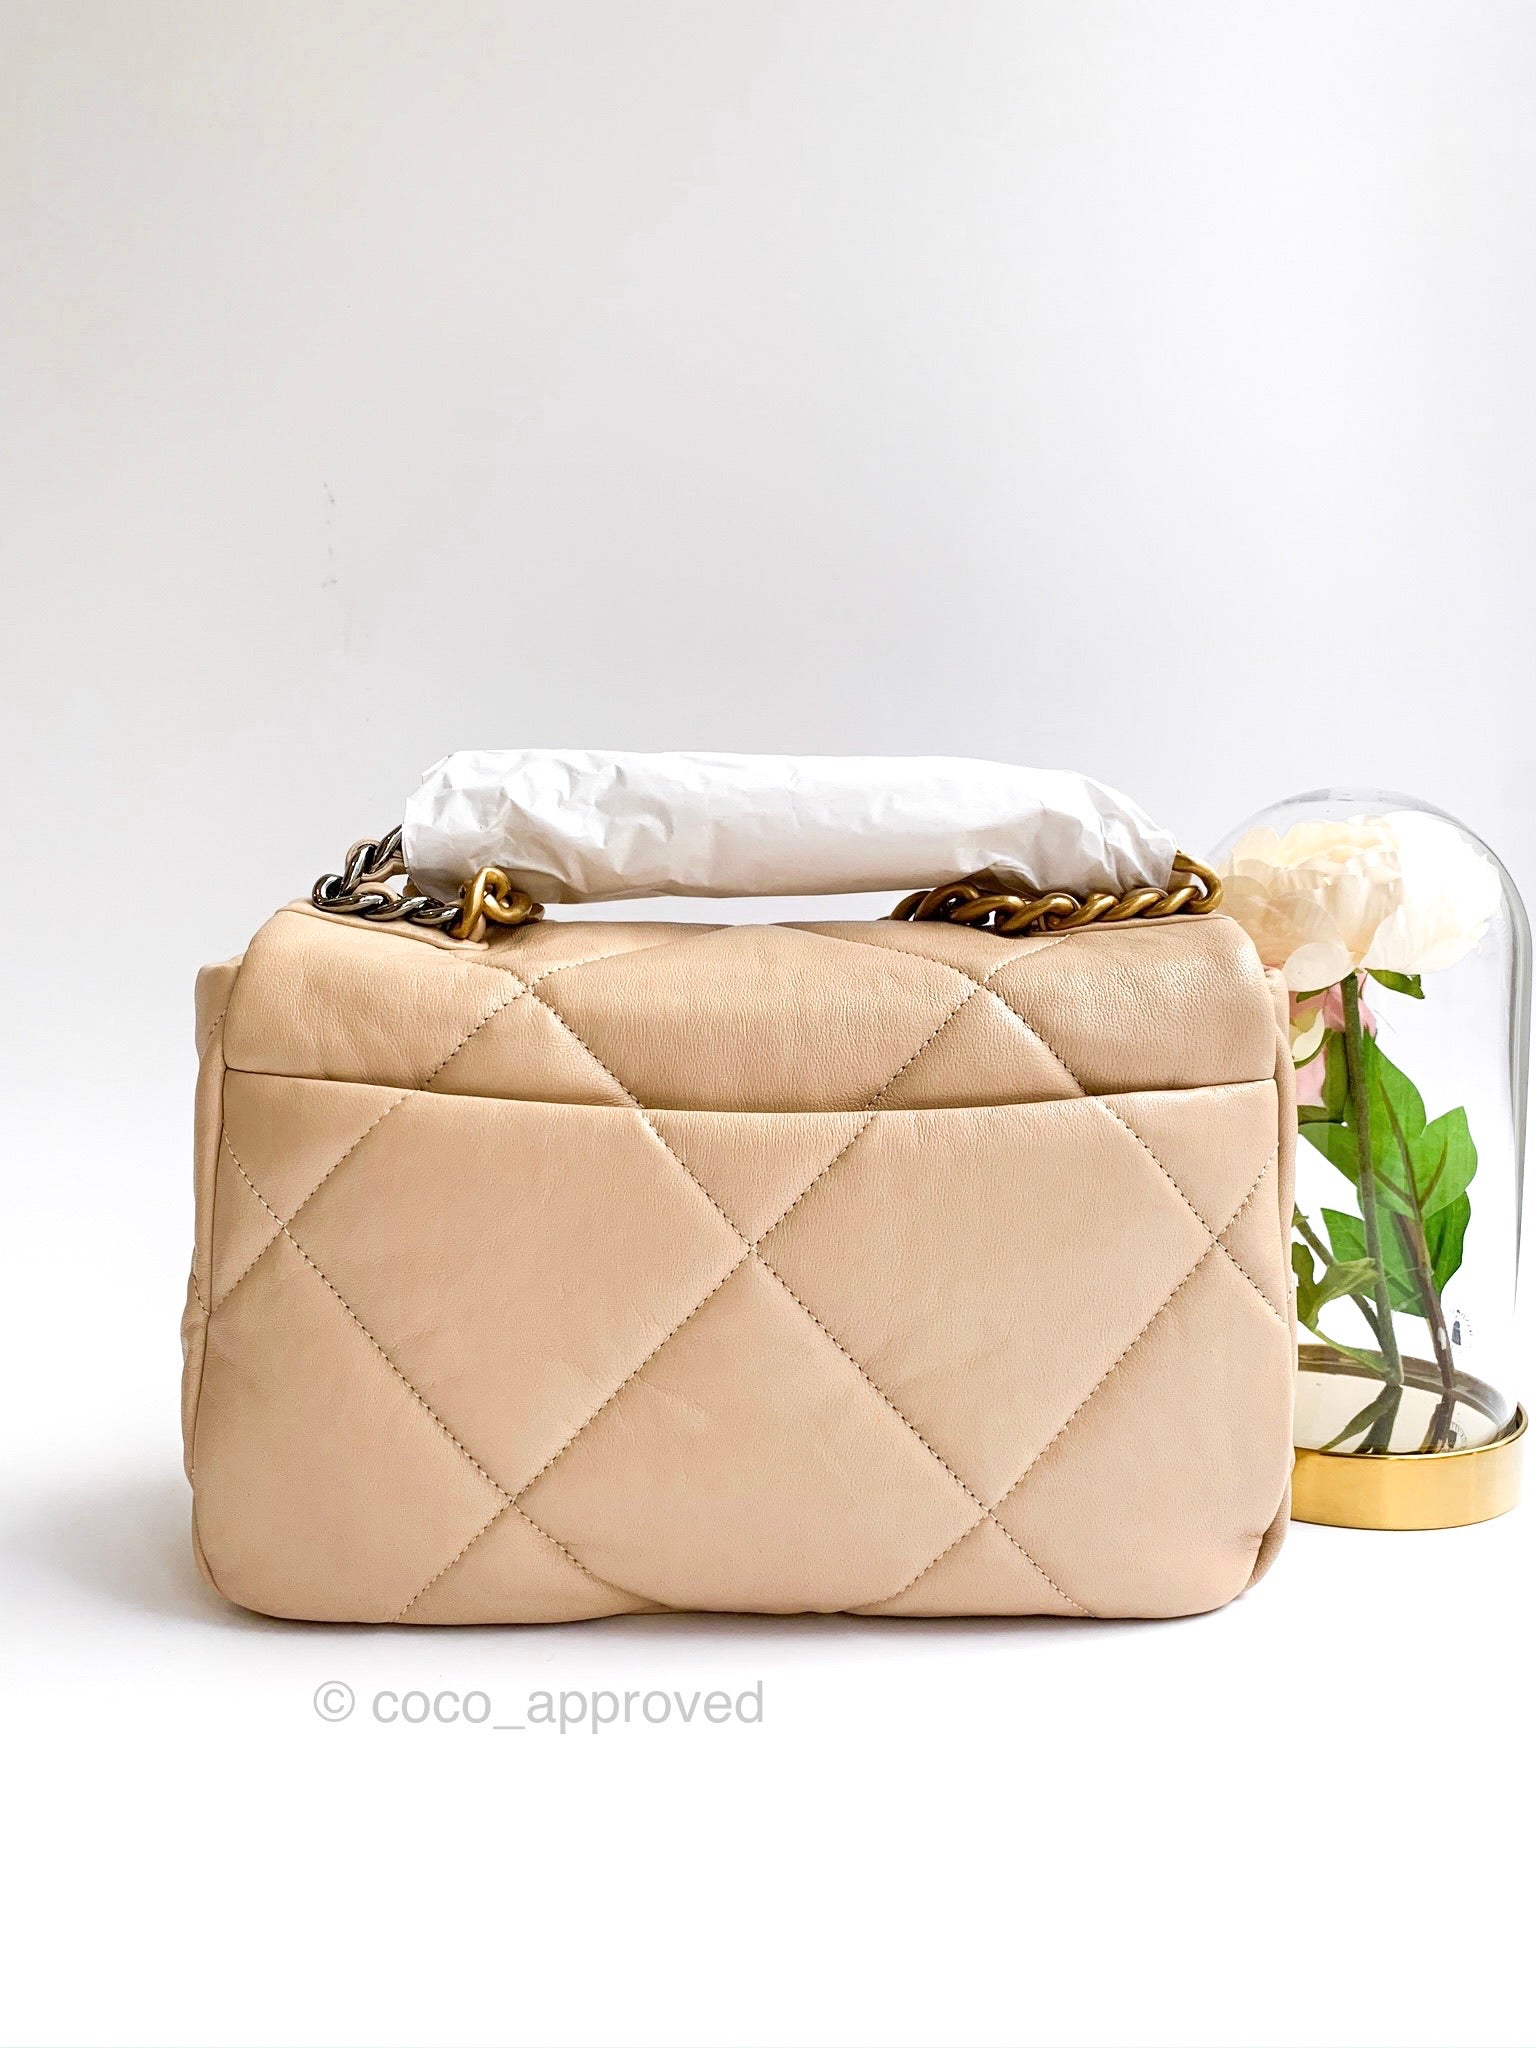 Chanel 19 leather handbag Chanel Beige in Leather - 29992325